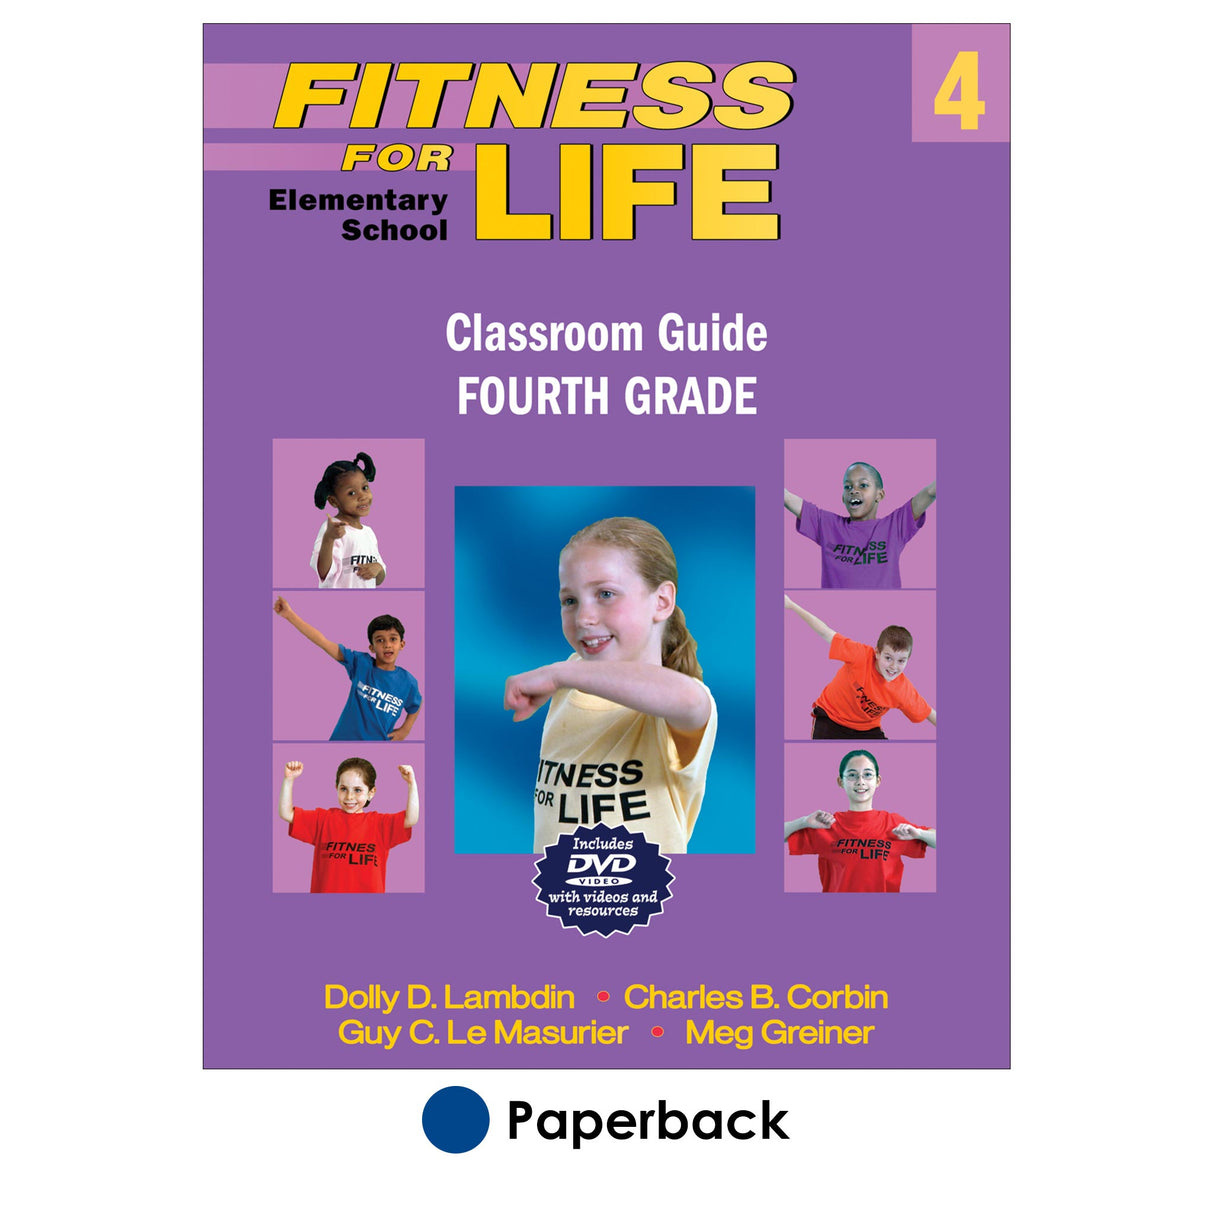 Fitness for Life Elementary School Classroom Guide: Fourth Grade